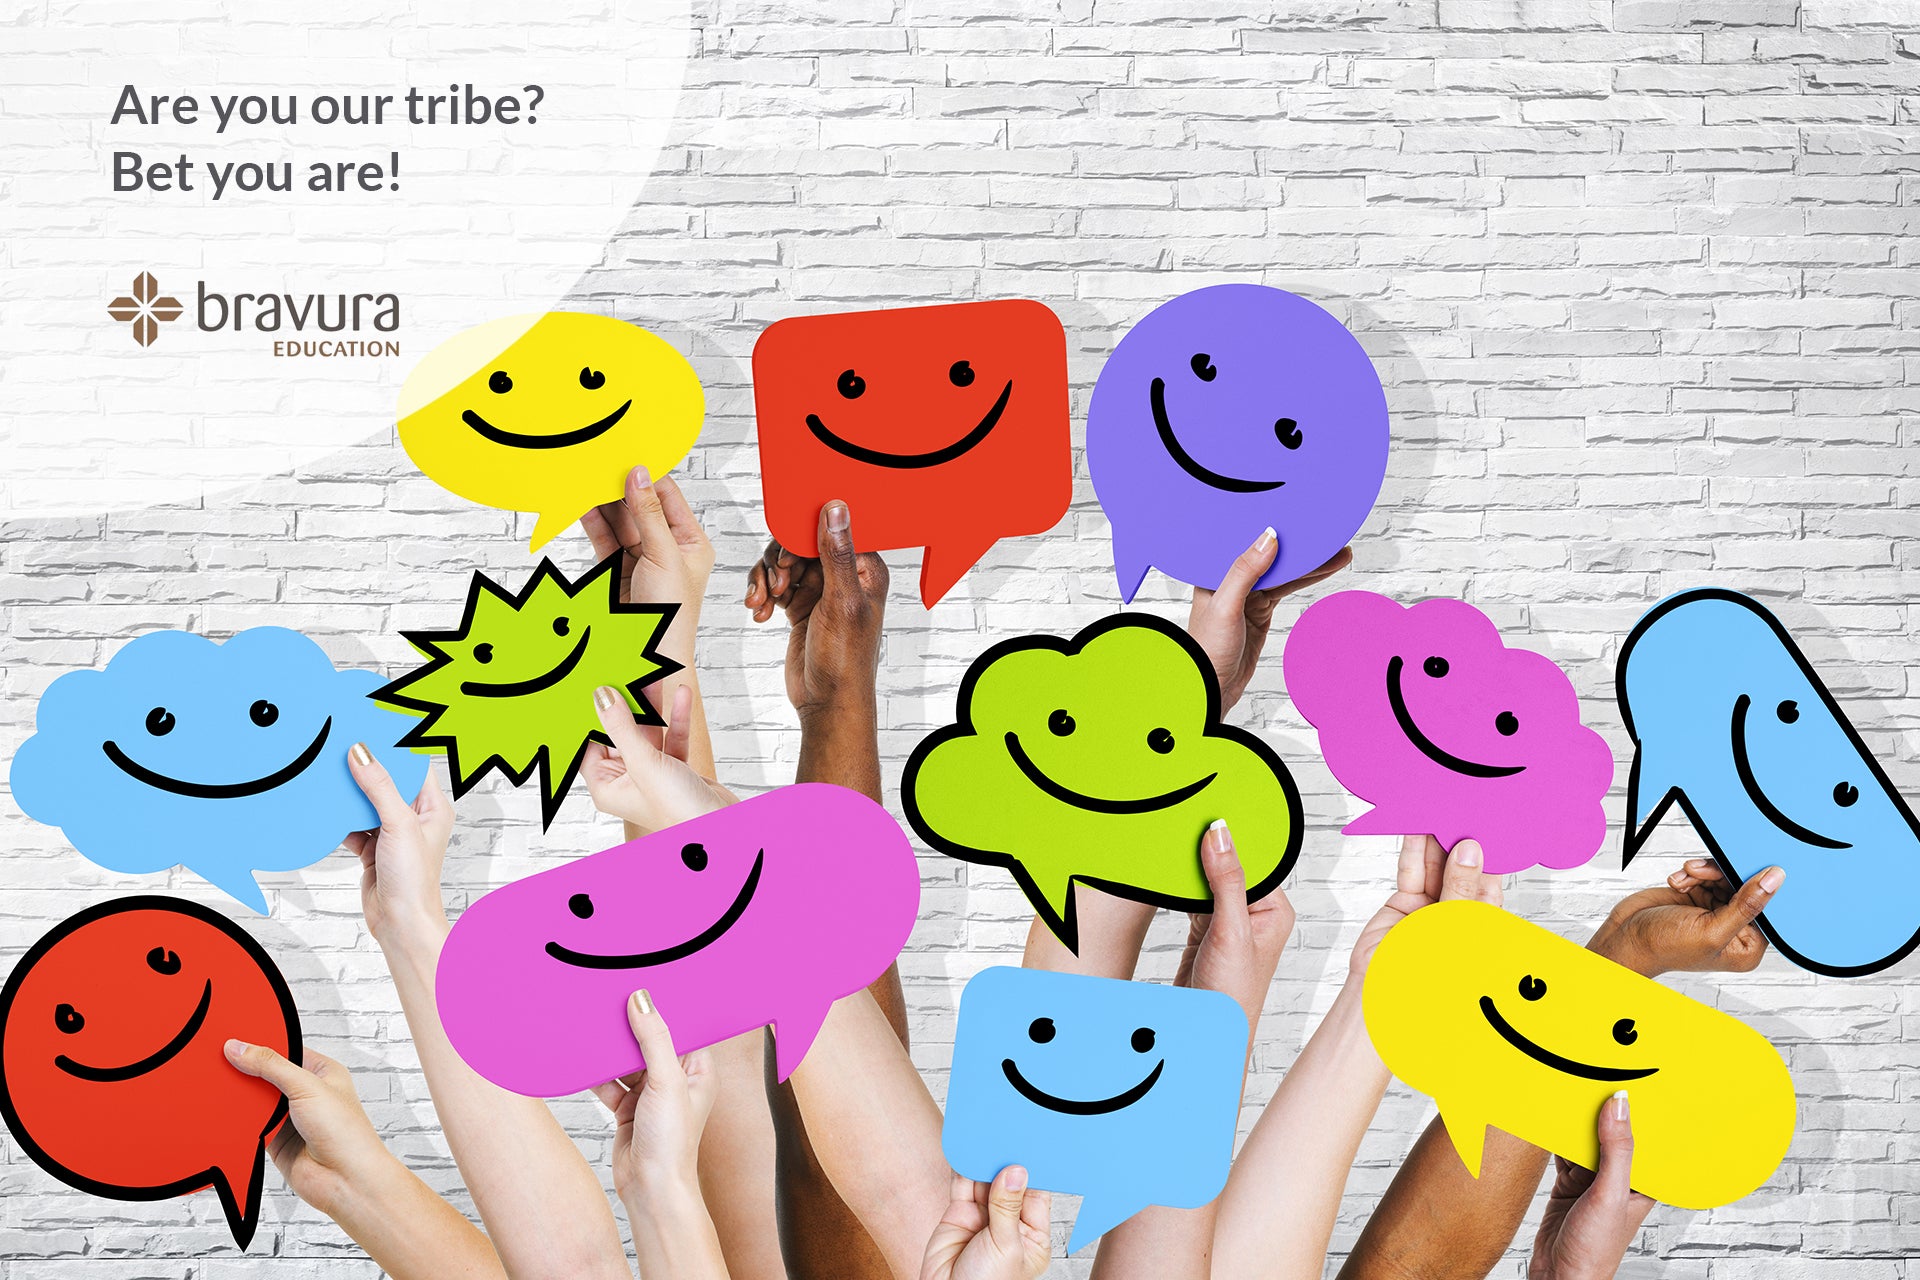 Are you our tribe? Bet you are!